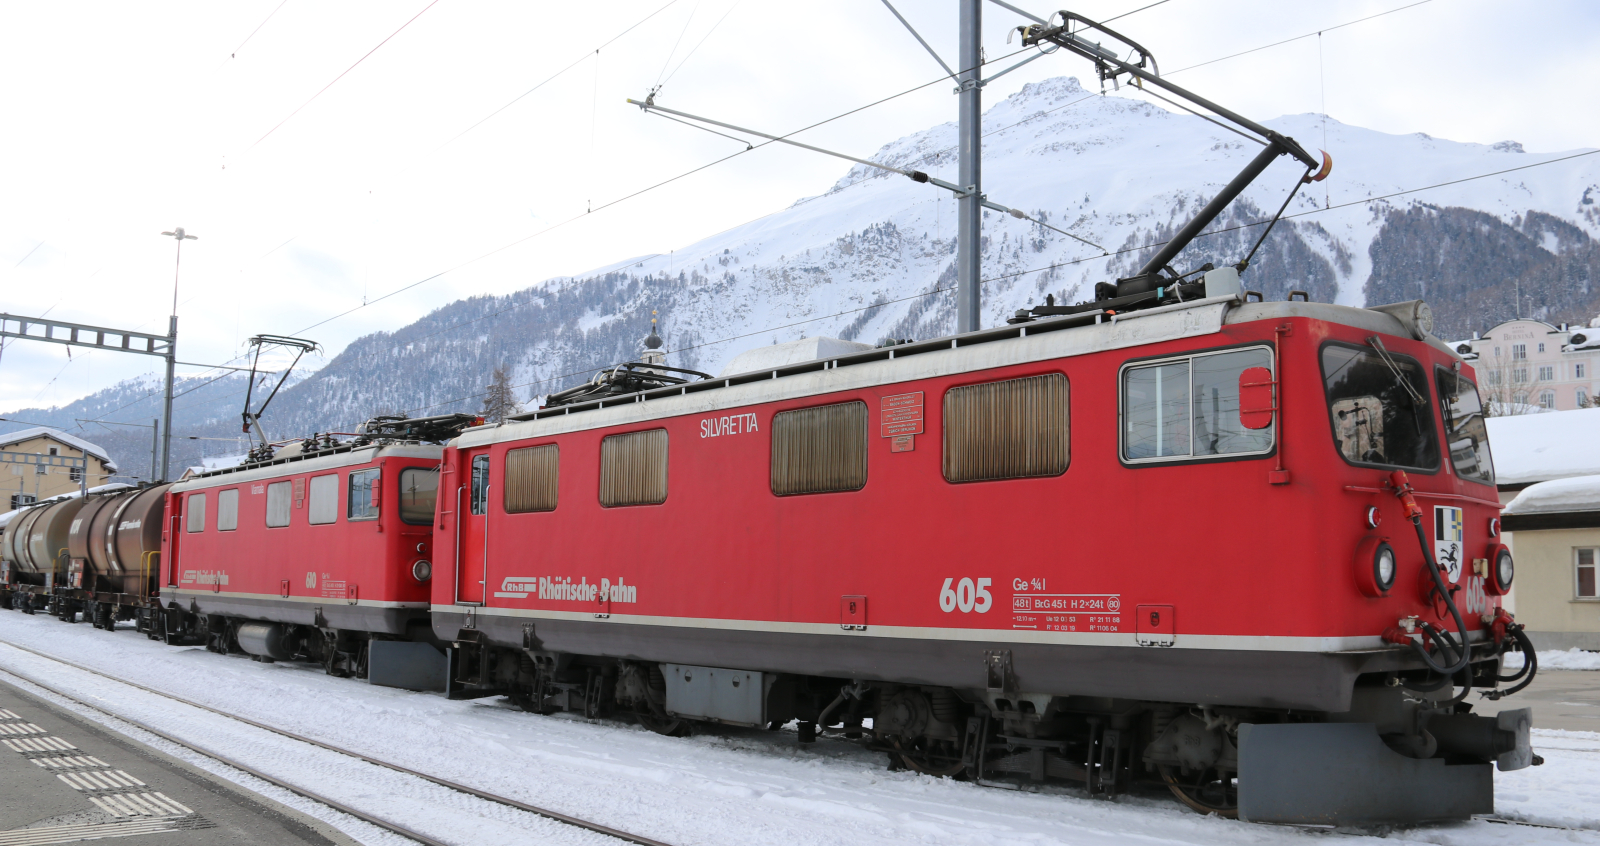 No. 605 and 610 with modern driver's cabs in February 2021 in front of a freight train in Samedan